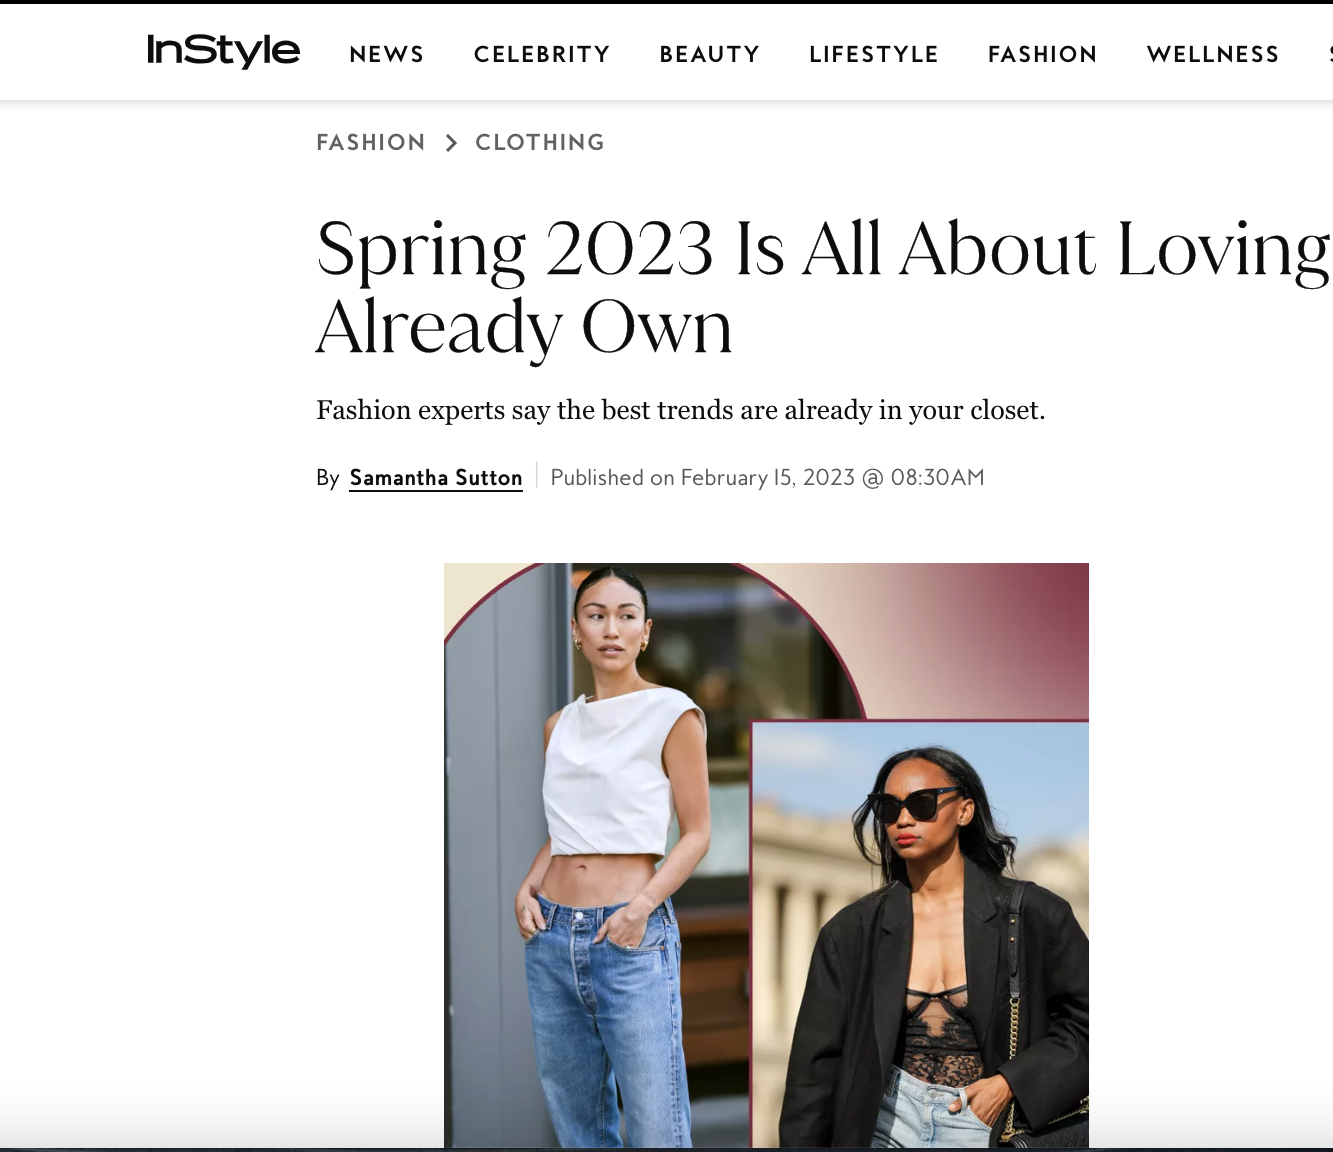 INSTYLE: Spring 2023 Is All About Loving What You Already Own